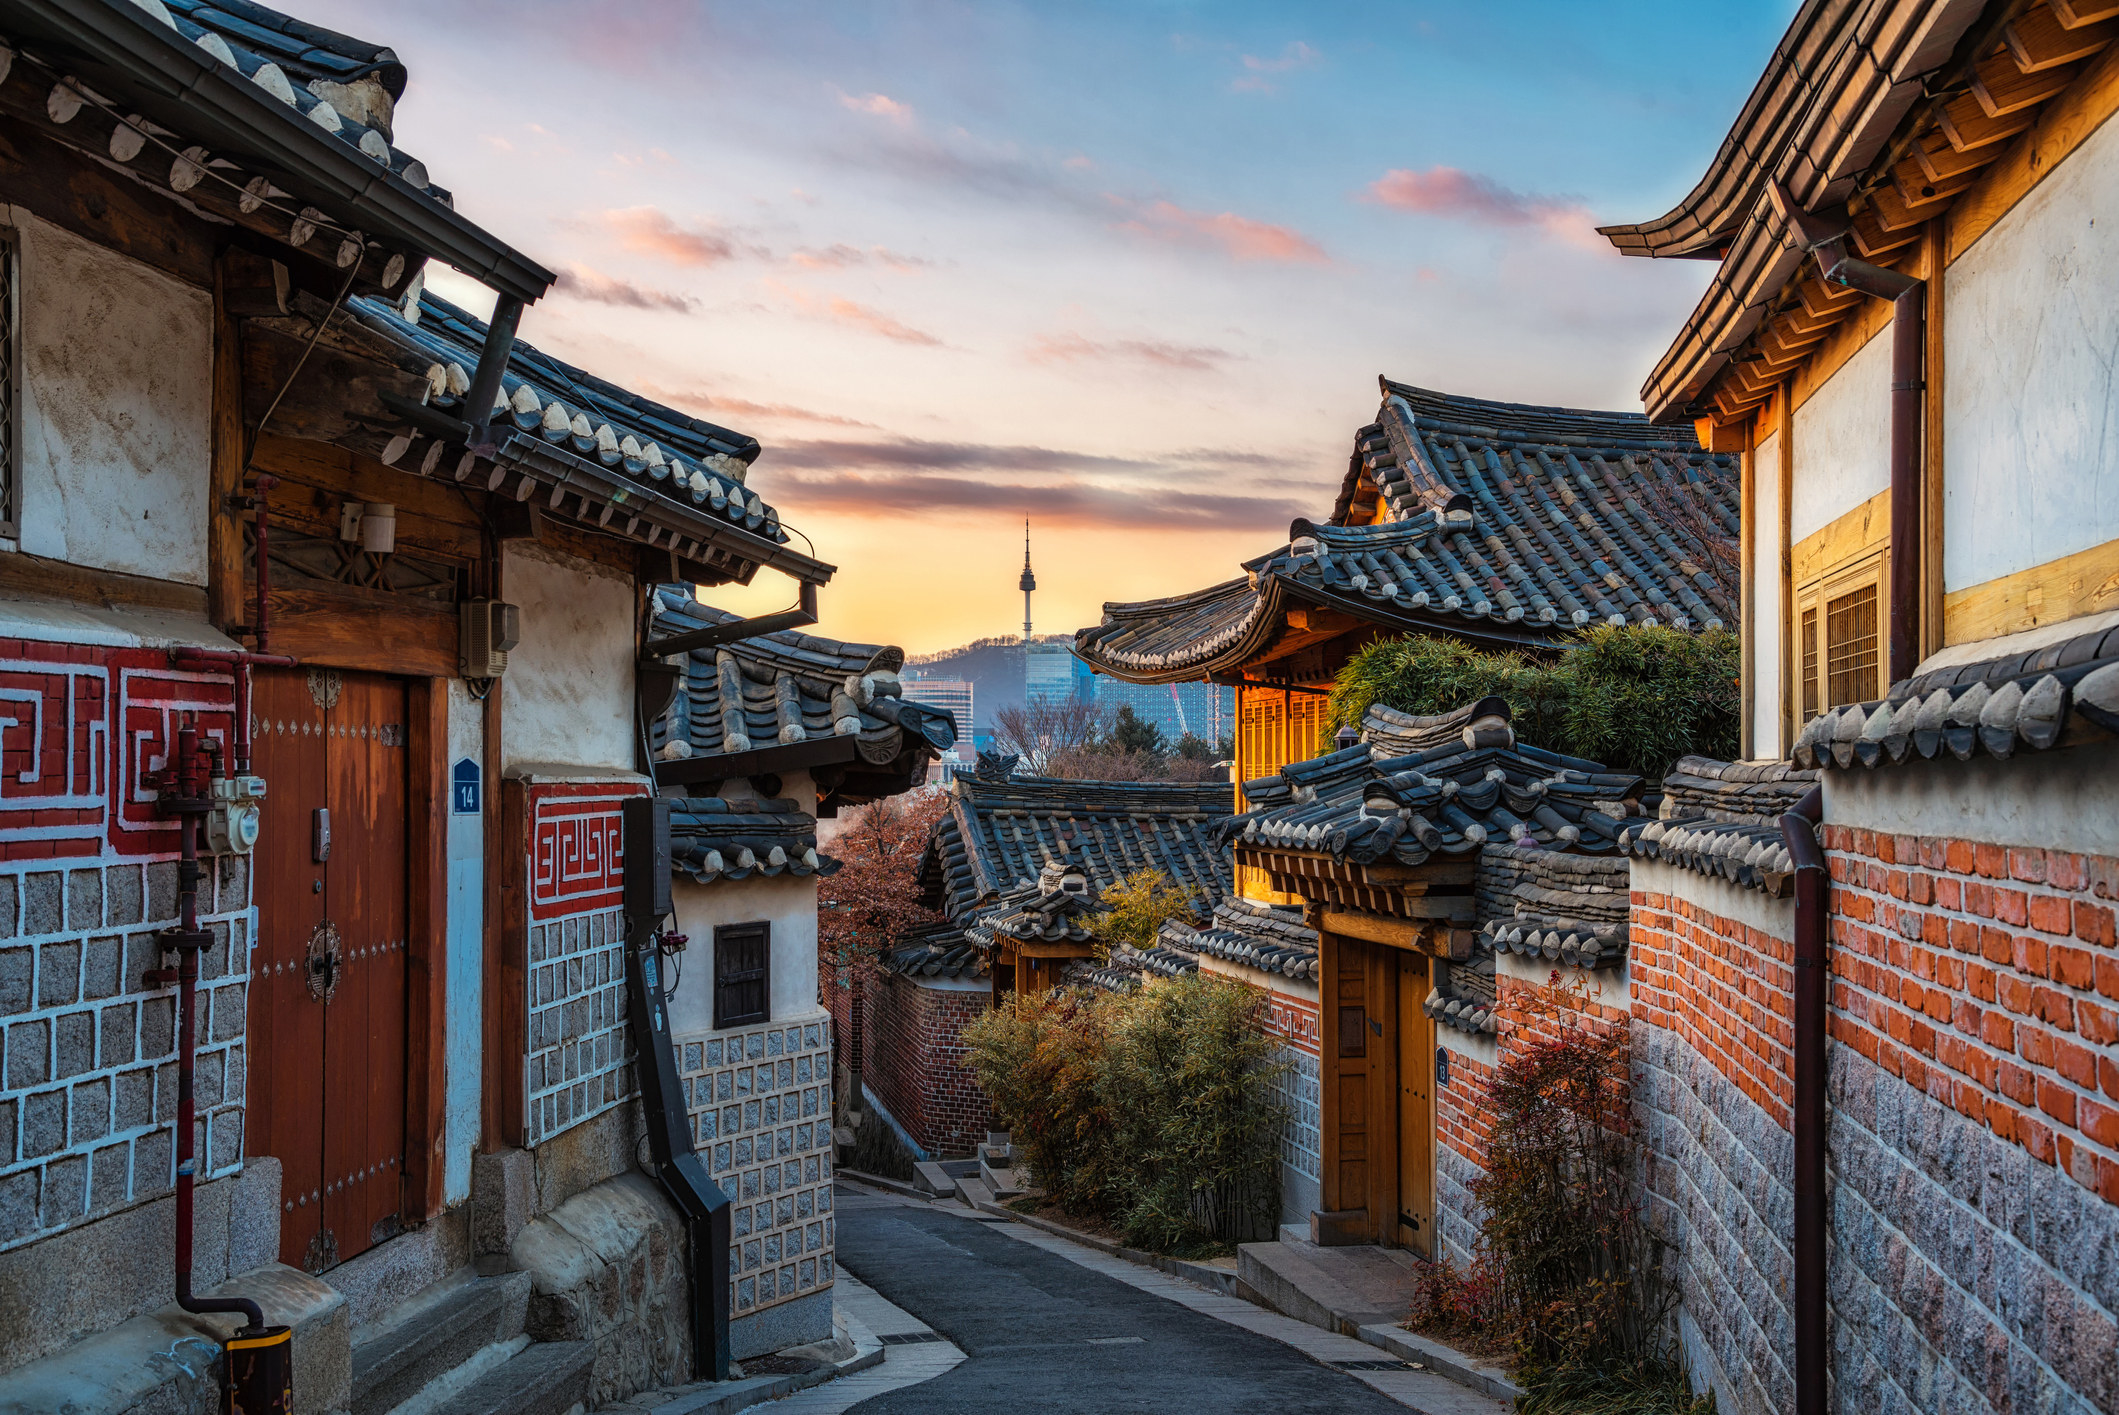 A street with traditional-style buildings in Seoul.